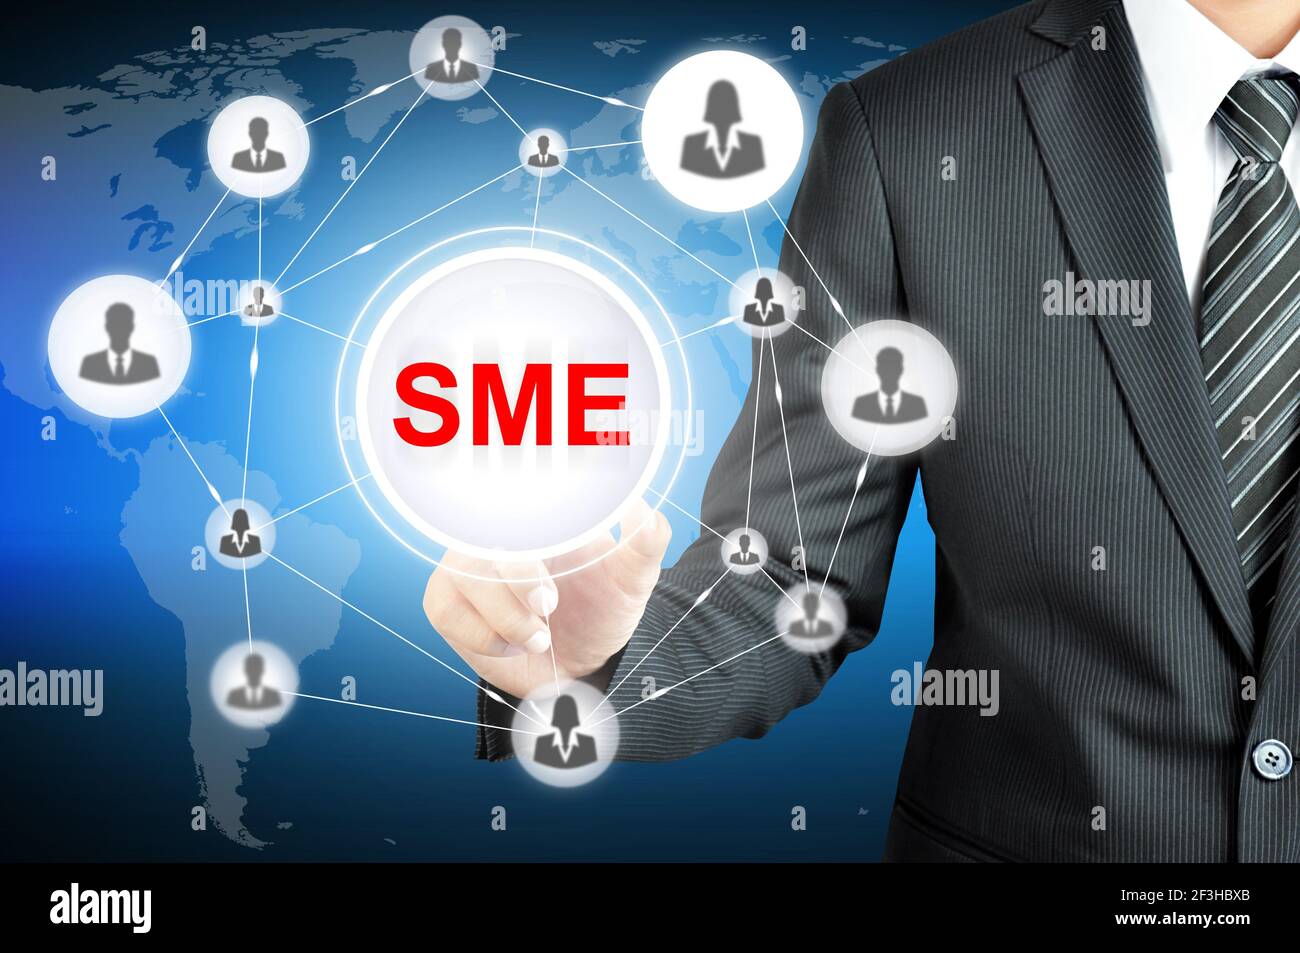 Businessman pointing on SME (Small & Medium Enterprise) sign on virtual screen with people icons linked as network Stock Photo